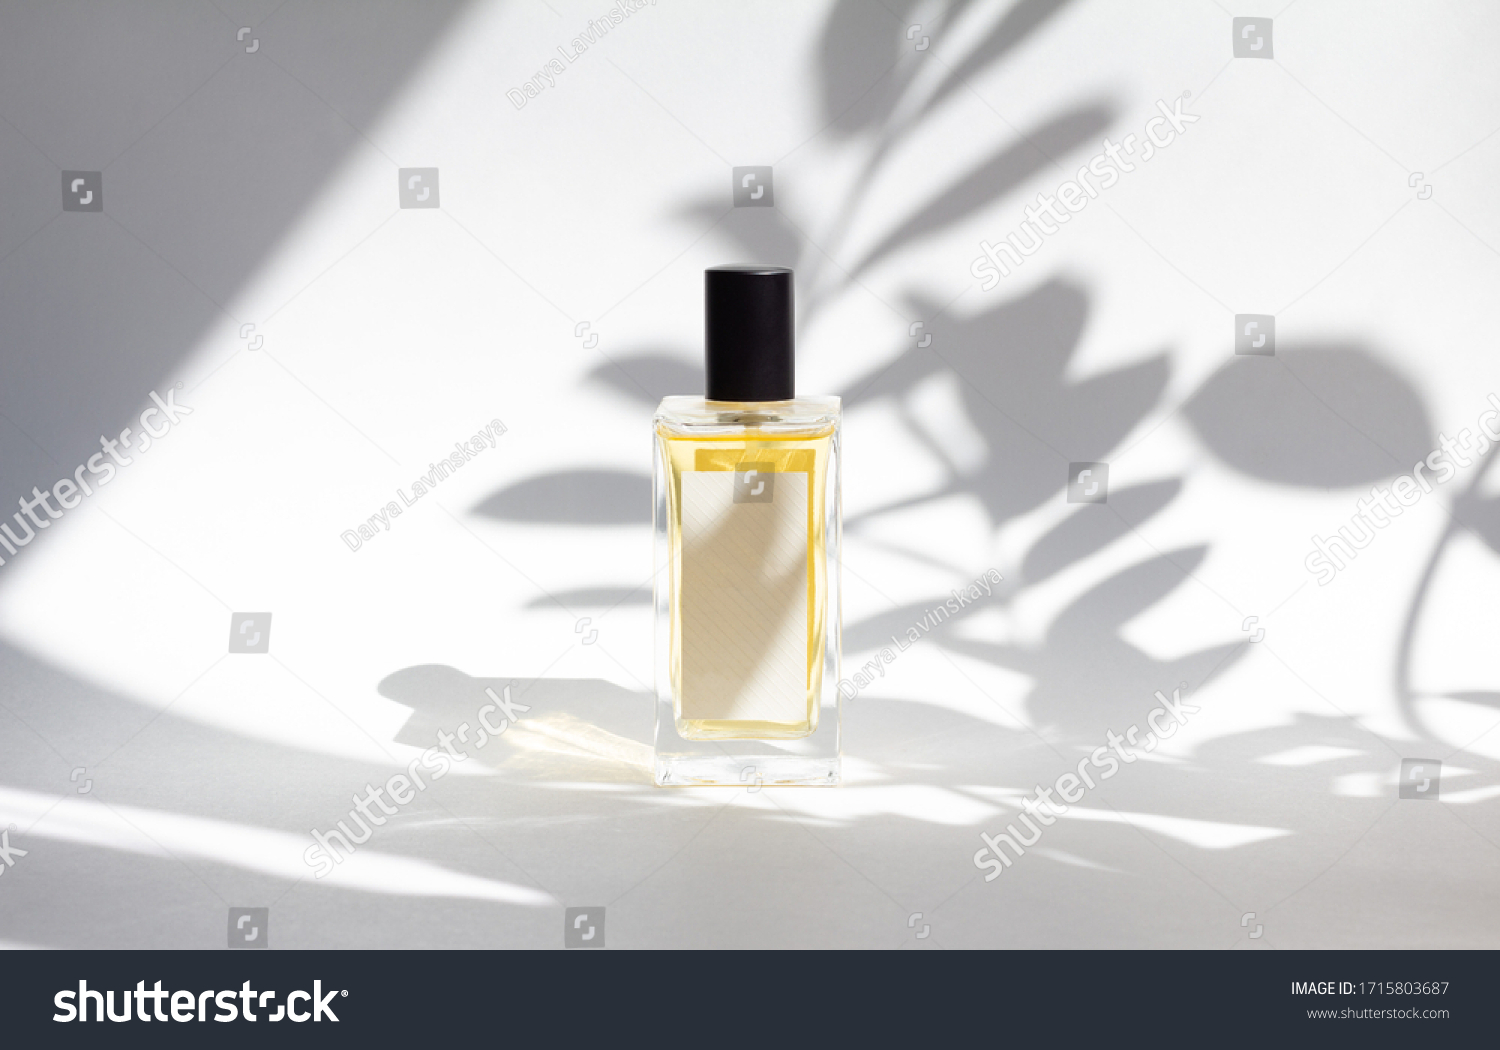 Bottle of essence perfume on white background with sunlight and shadows of leaves. Minimal style perfumery template #1715803687